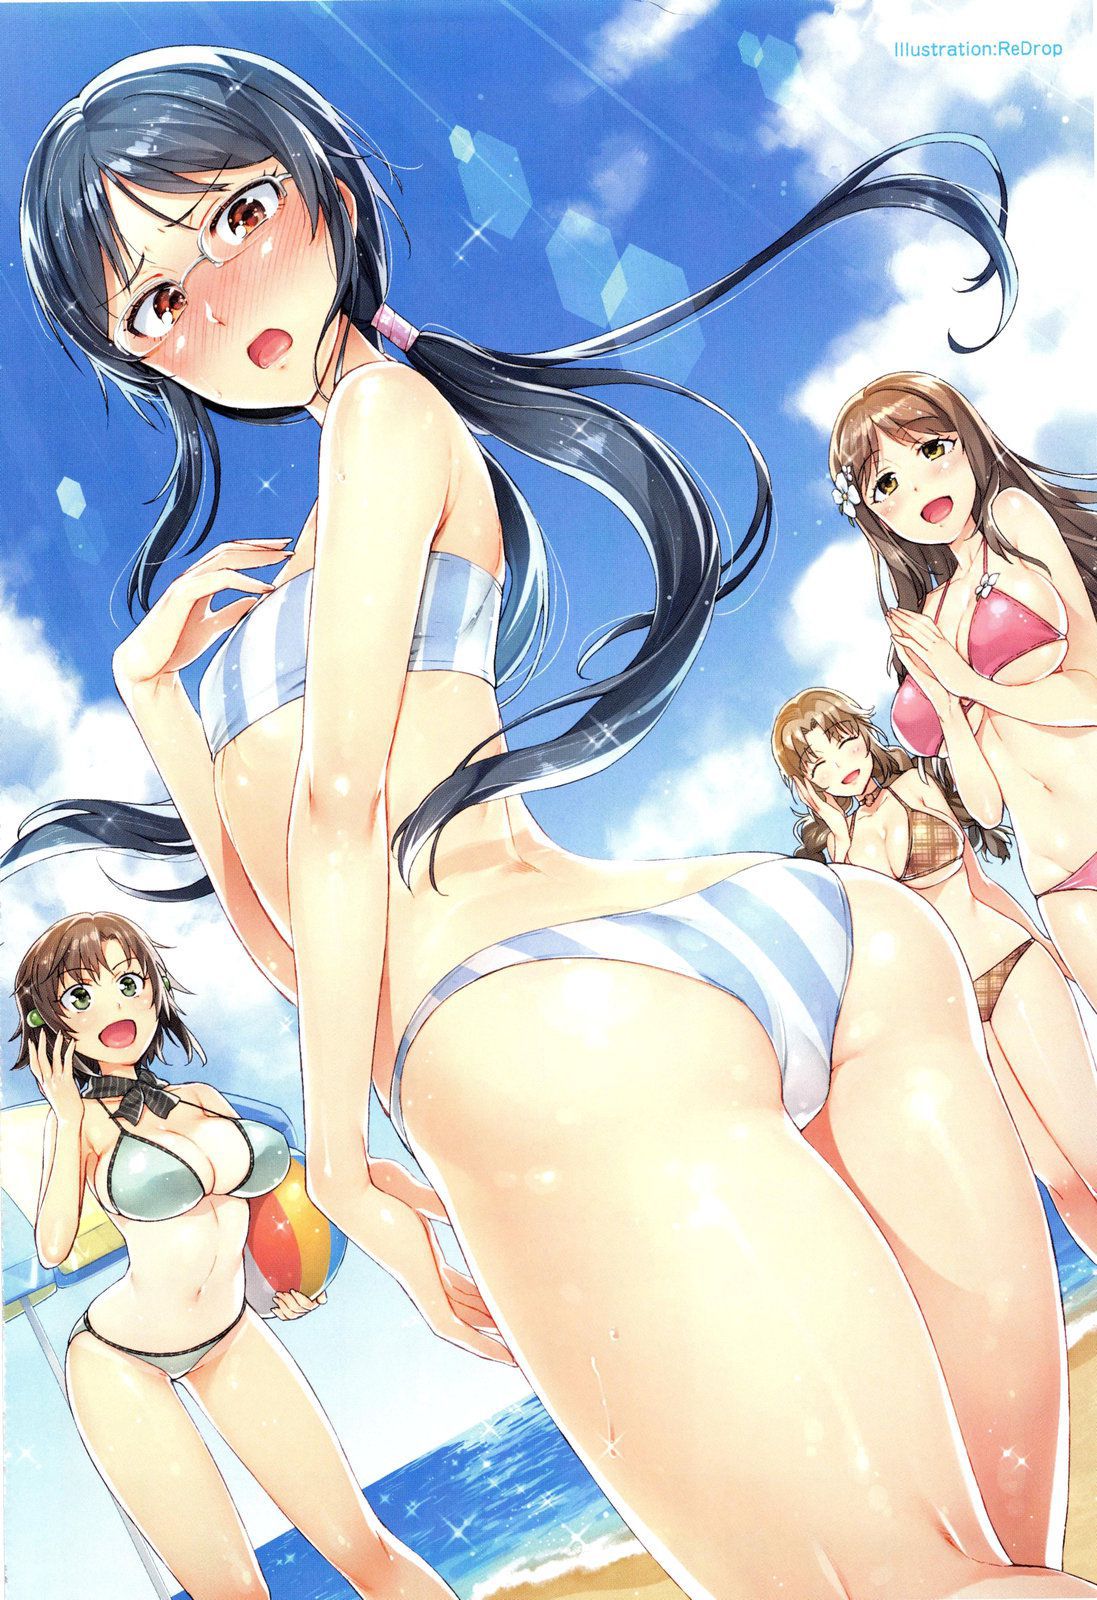 Swimsuits are erotic I can't believe I'm flossing in such a way, just like pants round dashi 11